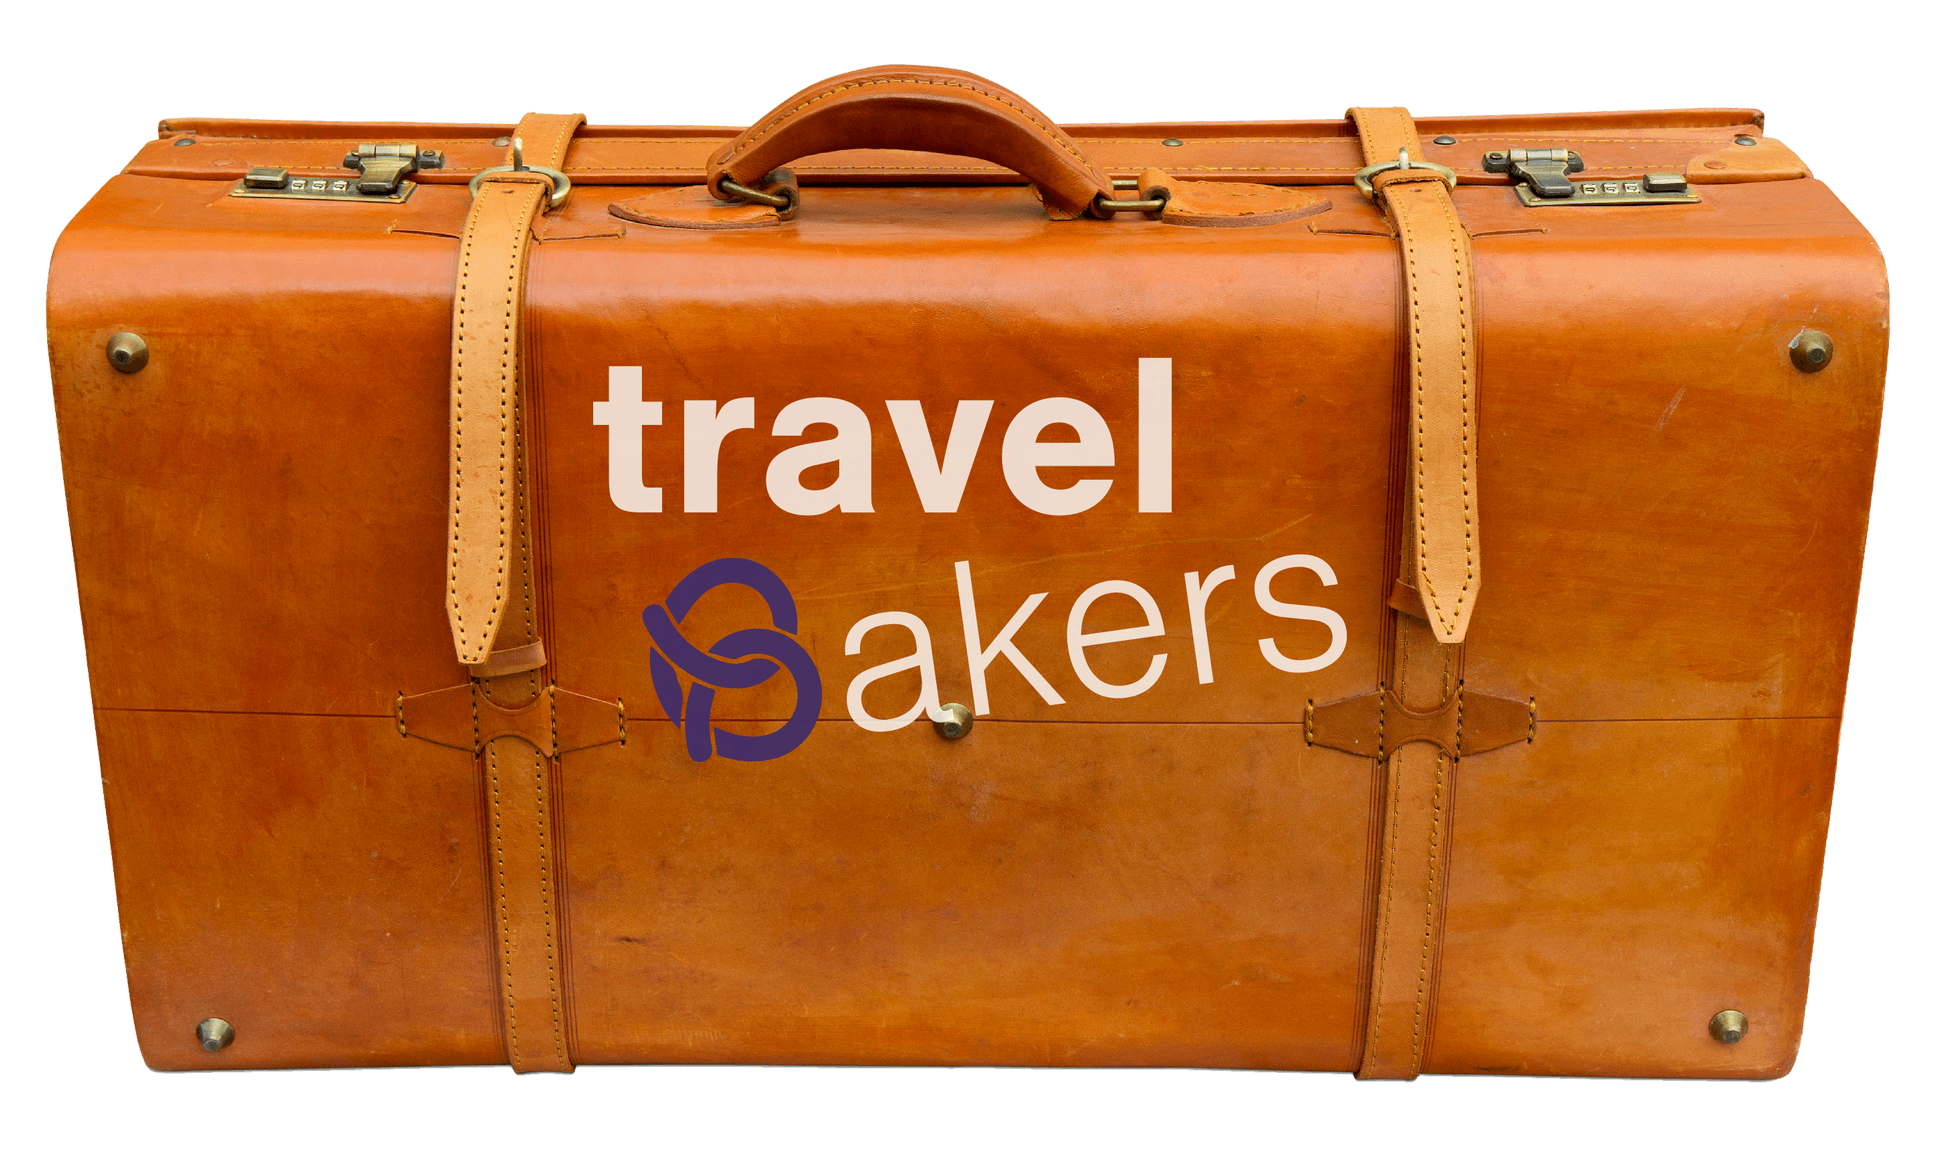 Travelbakers redesign Koncepto